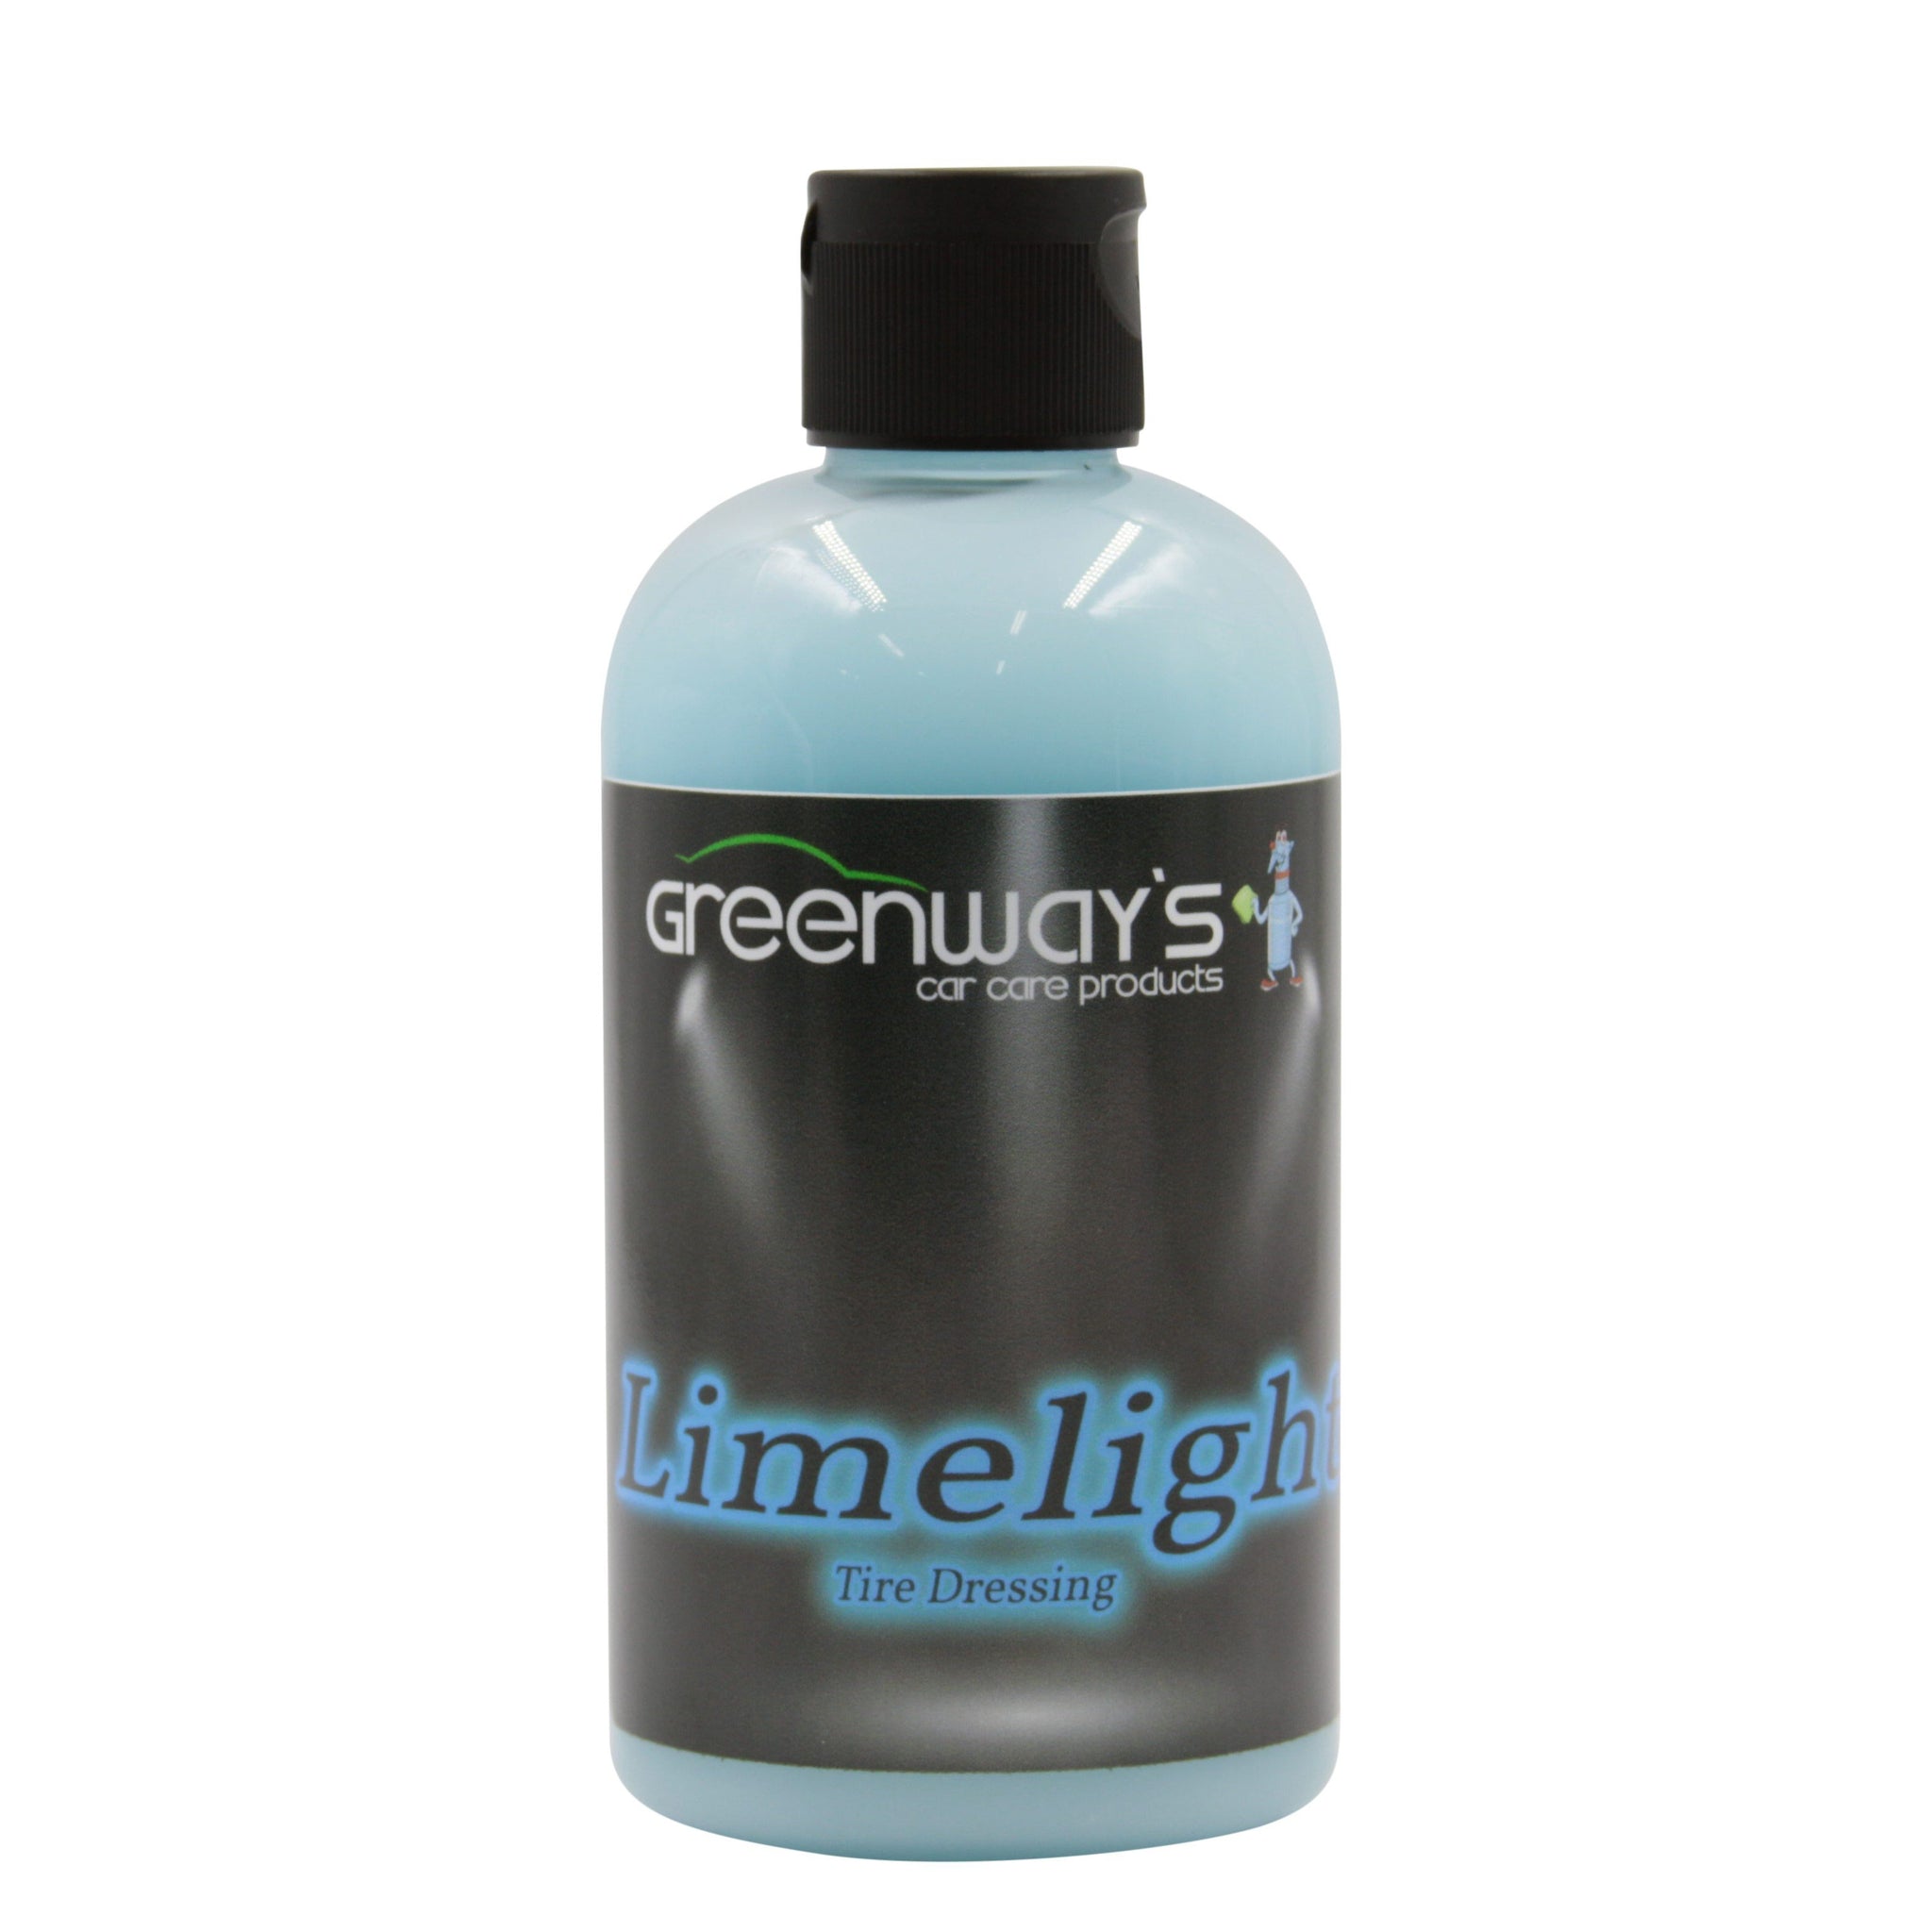 Greenway’s Limelight Water-Based Tire Dressing, extreme high gloss finish, thick, sling-free, watermelon scented. 8 ounces.